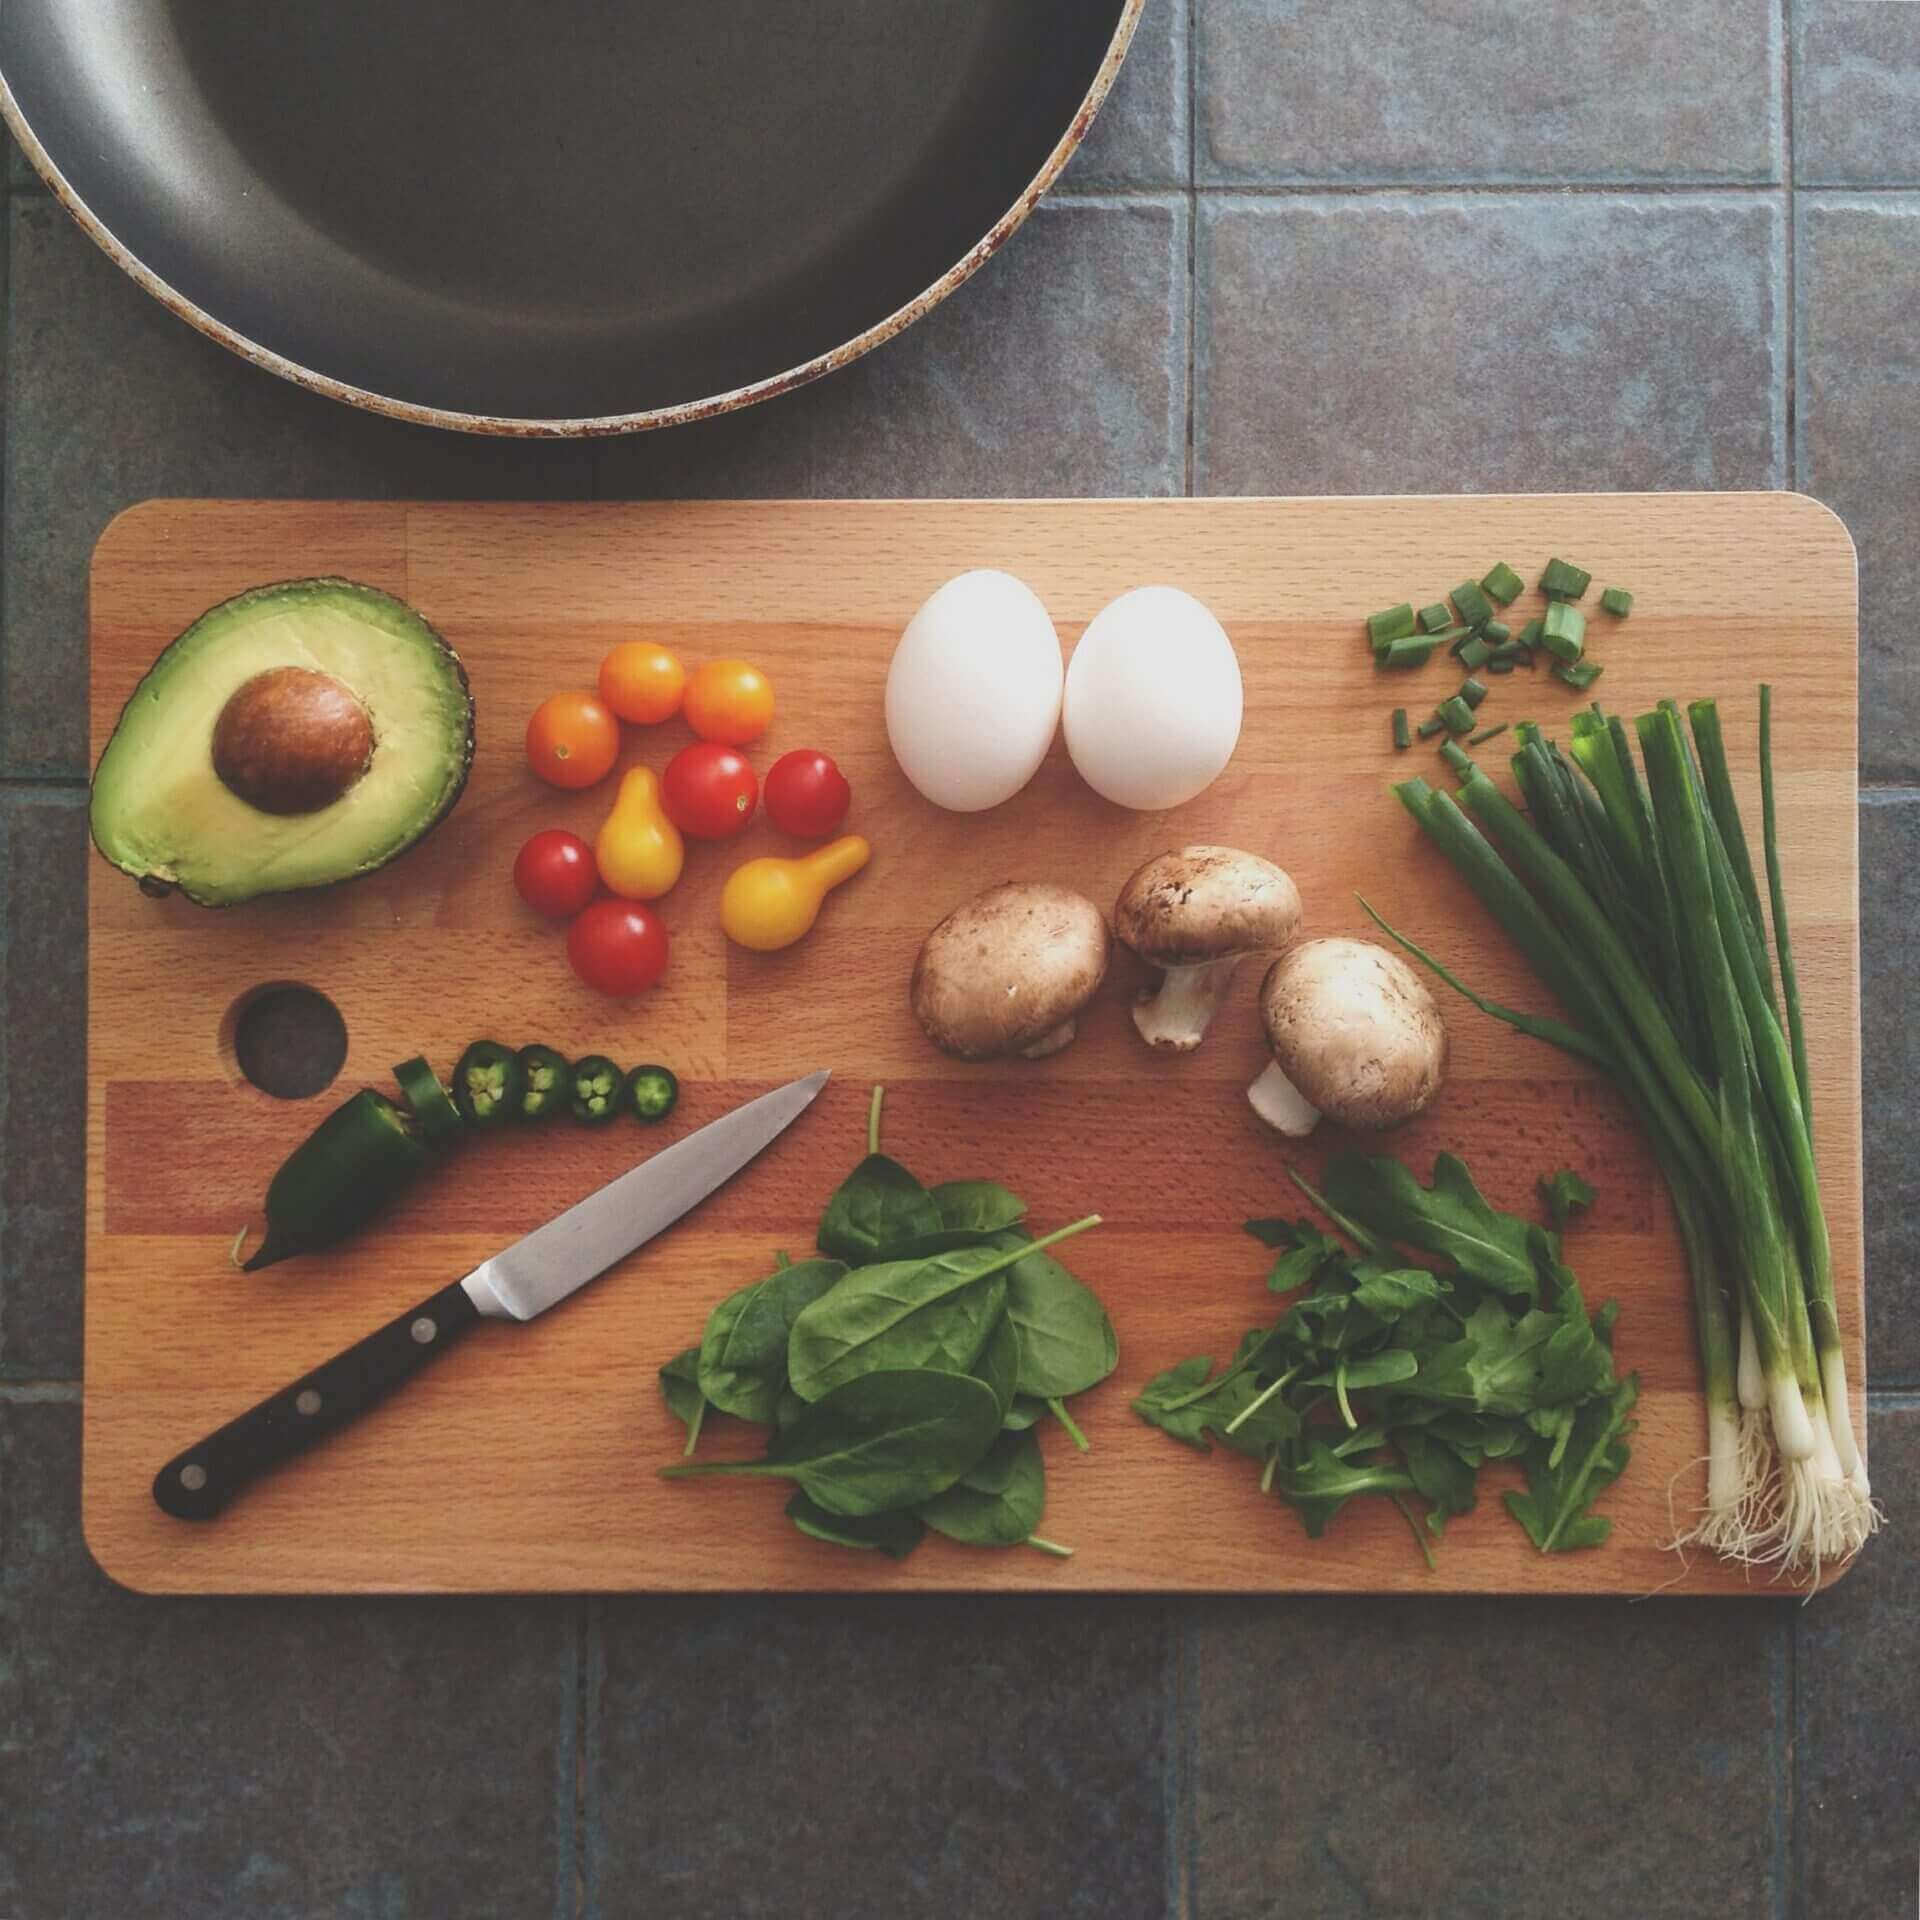 Wooden cutting board with eggs, avocado, spinach, mushroom, tomatoes, green onions, and peppers with a knife.